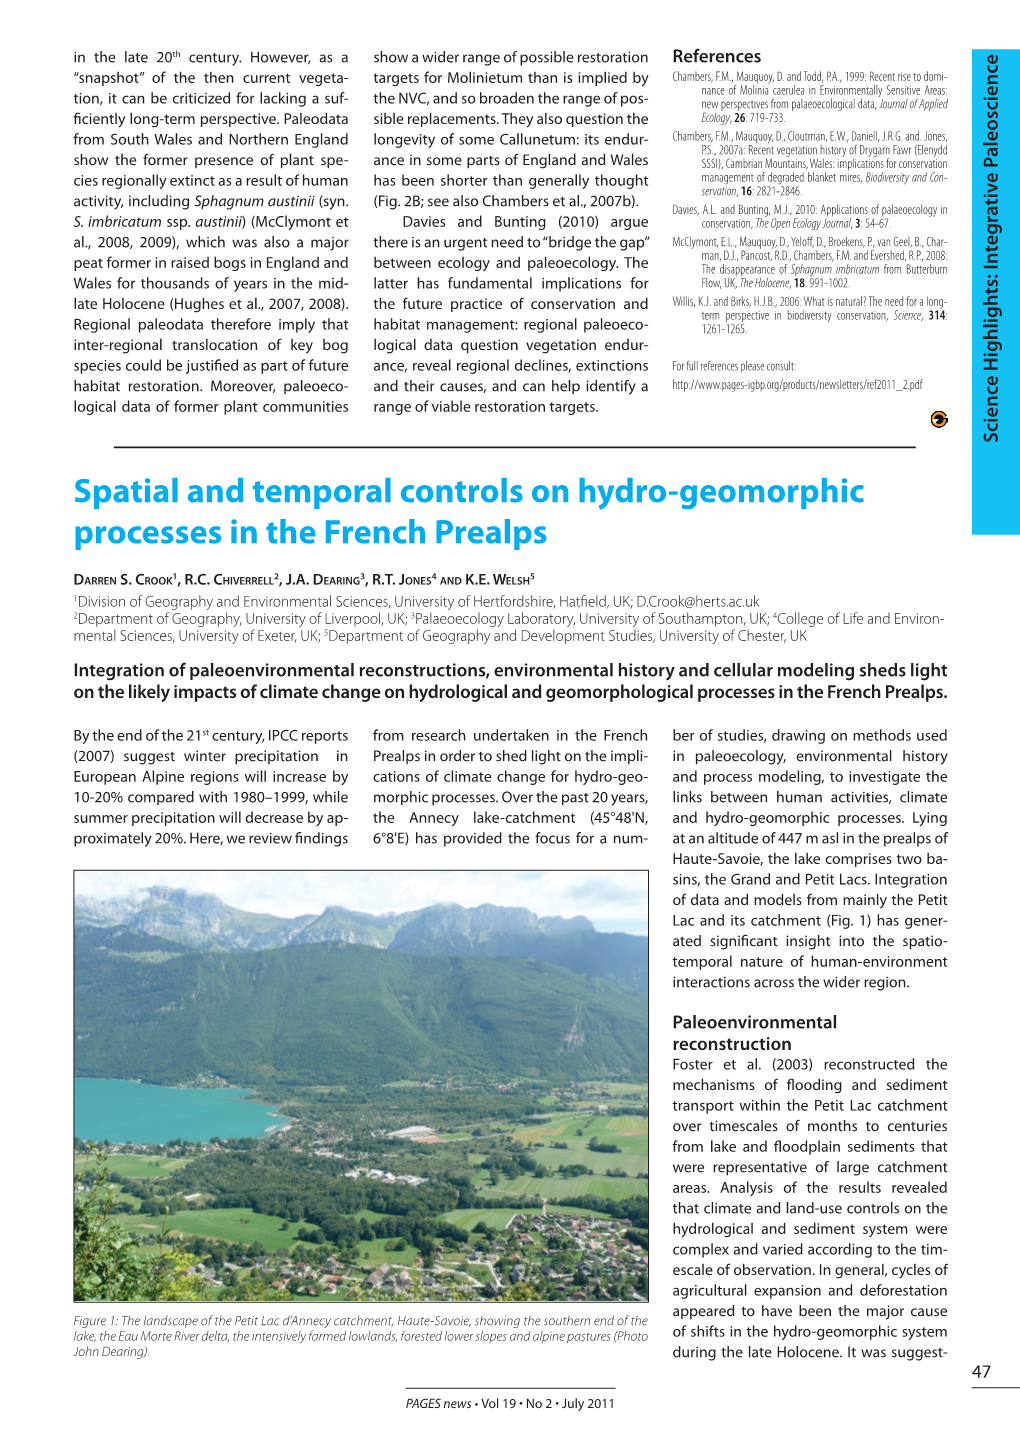 Spatial and Temporal Controls on Hydro-Geomorphic Processes in the French Prealps